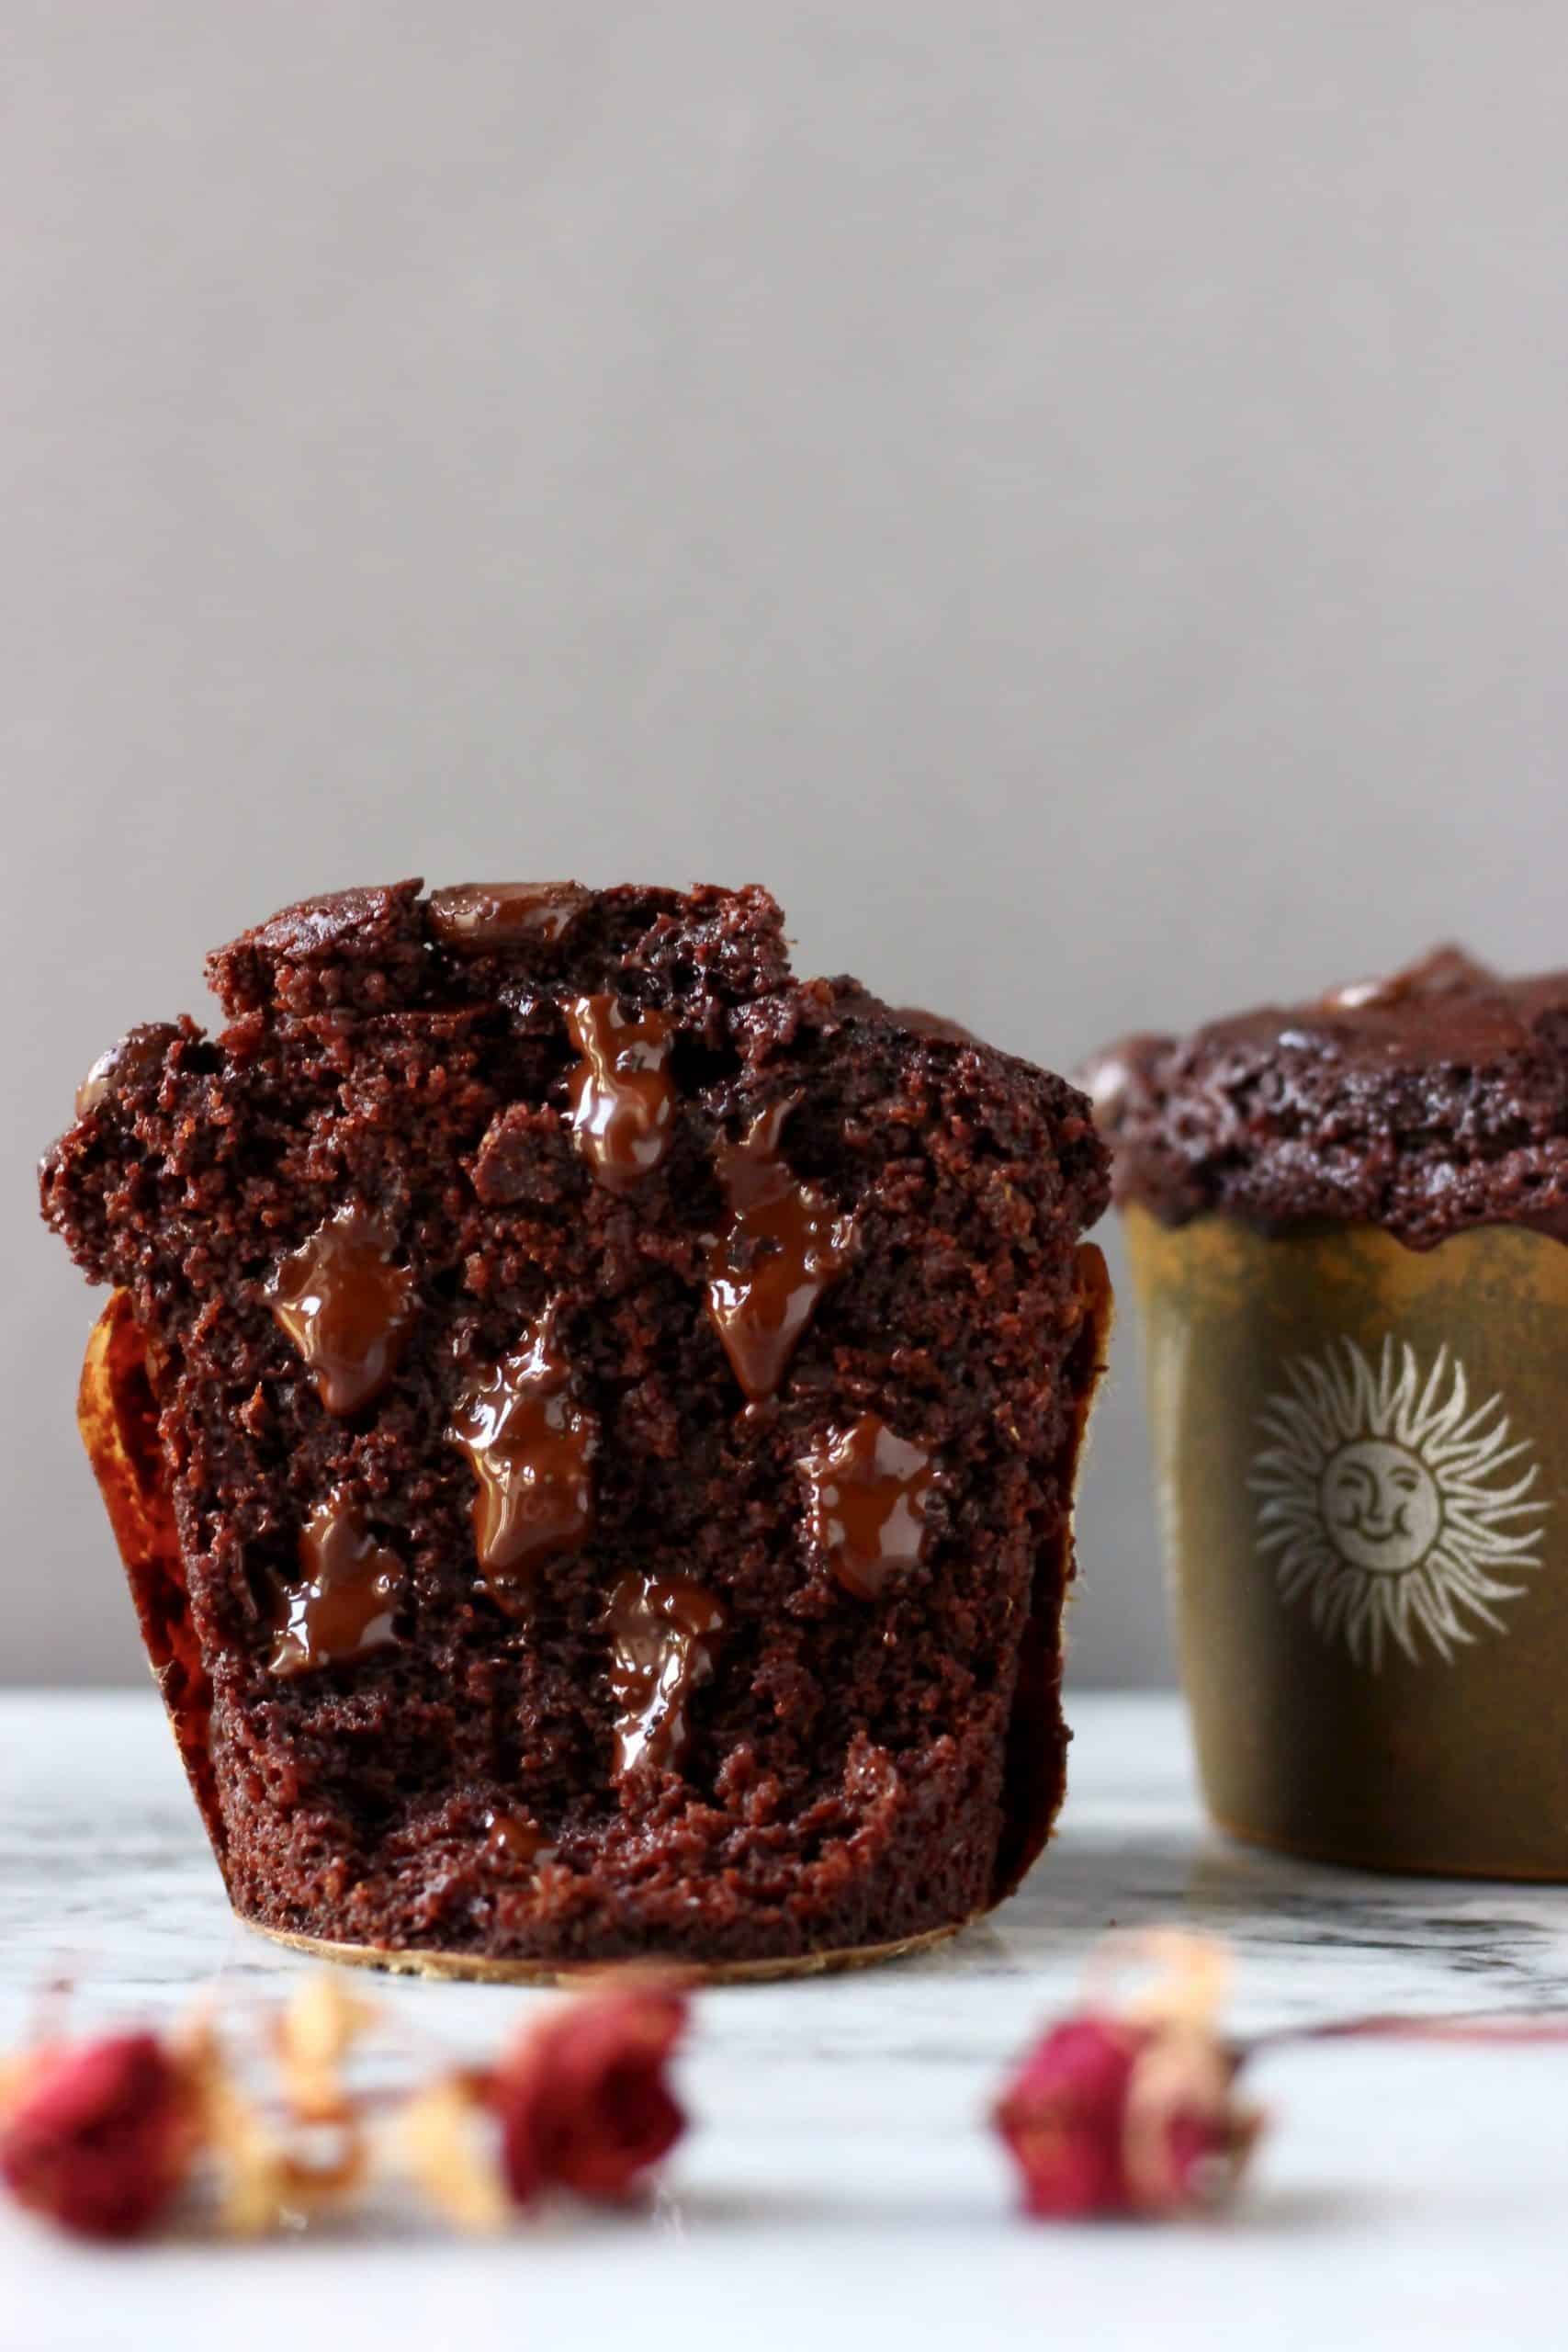 Two gluten-free vegan chocolate zucchini muffins, one cut in half with melted chocolate chips inside